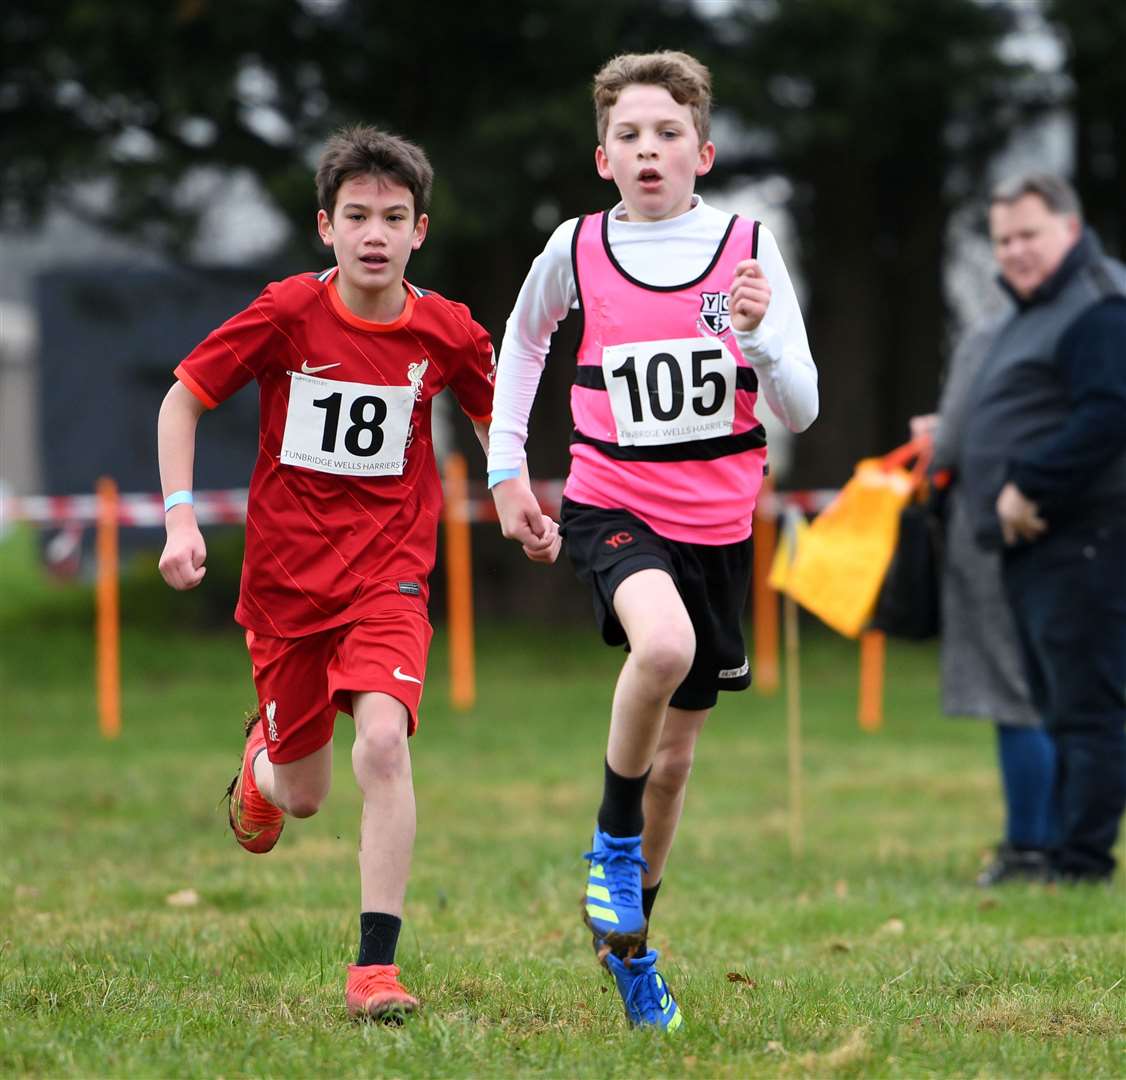 Morgan Huw (No.105) of Tonbridge leads Freddie Dixon (No.18) of Bexley in the battle for 11th place in the Year 7 boys' event. Picture: Barry Goodwin (54437731)